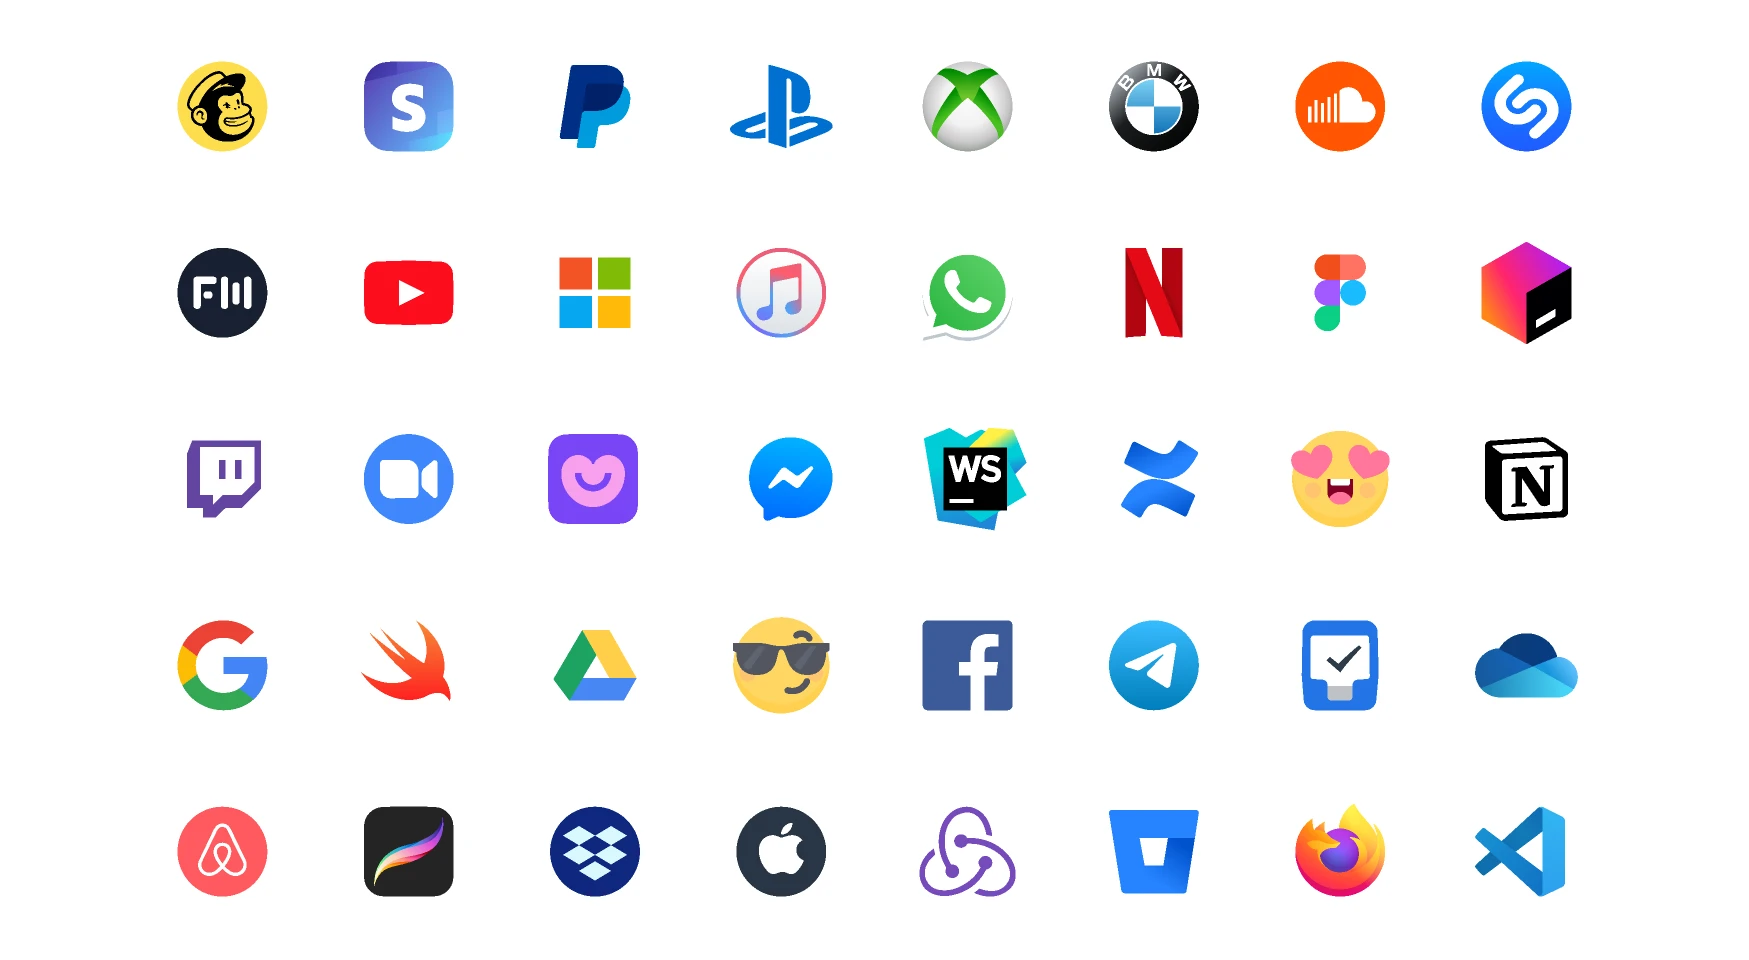 Brands logos for Figma and Adobe XD